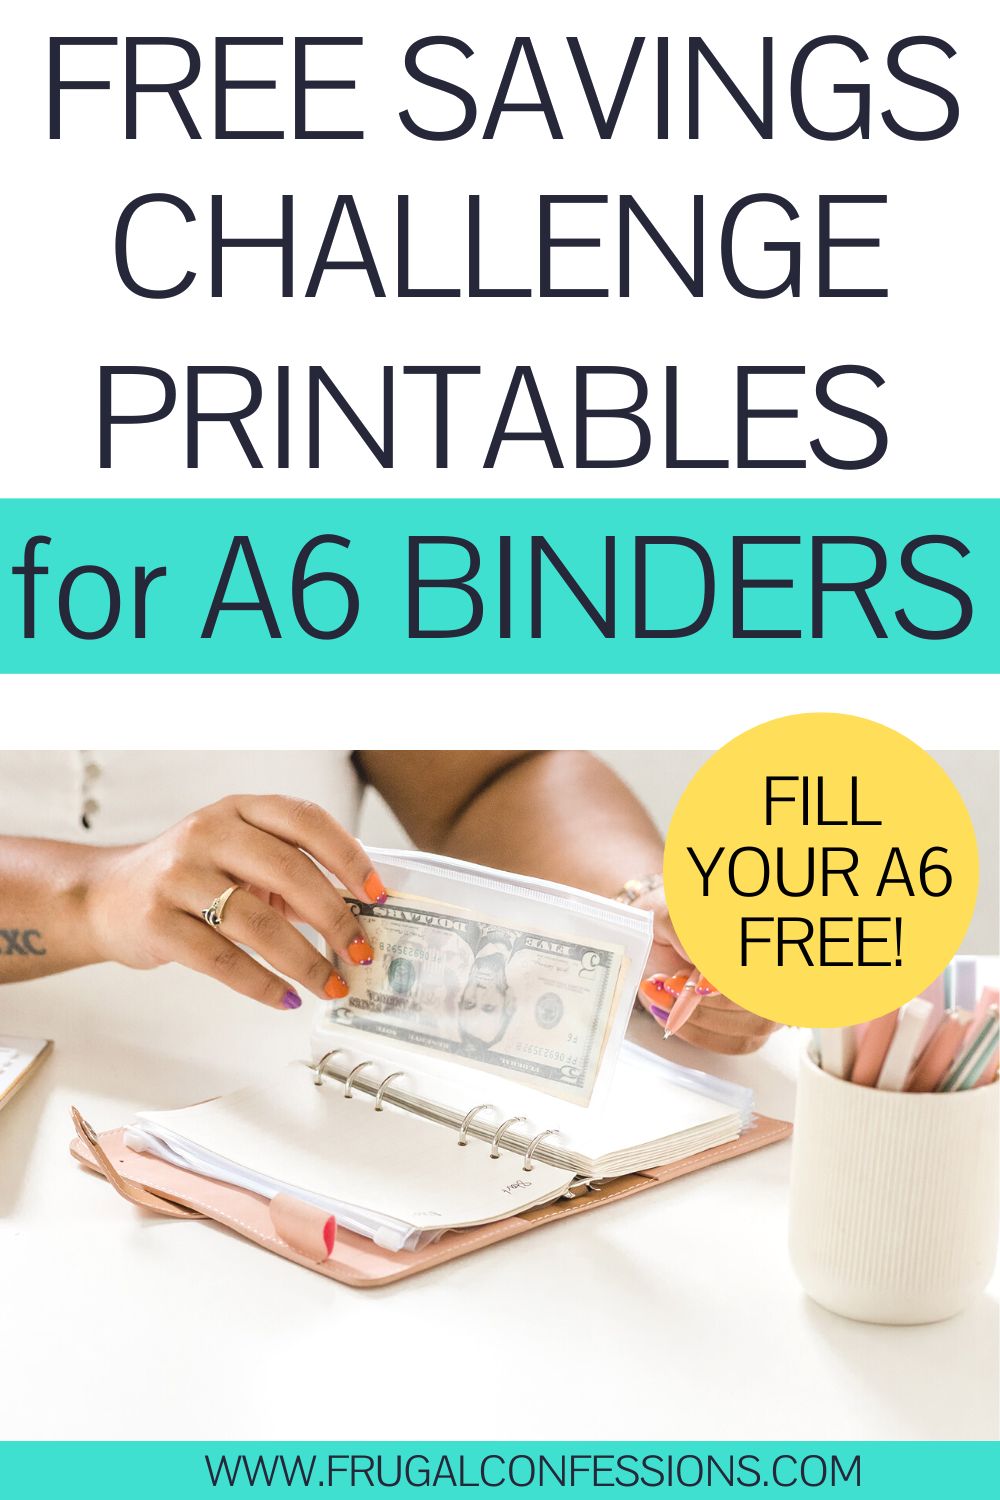 woman with cash filled envelopes in A6 pink binder at desk, text overlay "free savings challenge printables for A6 binders"